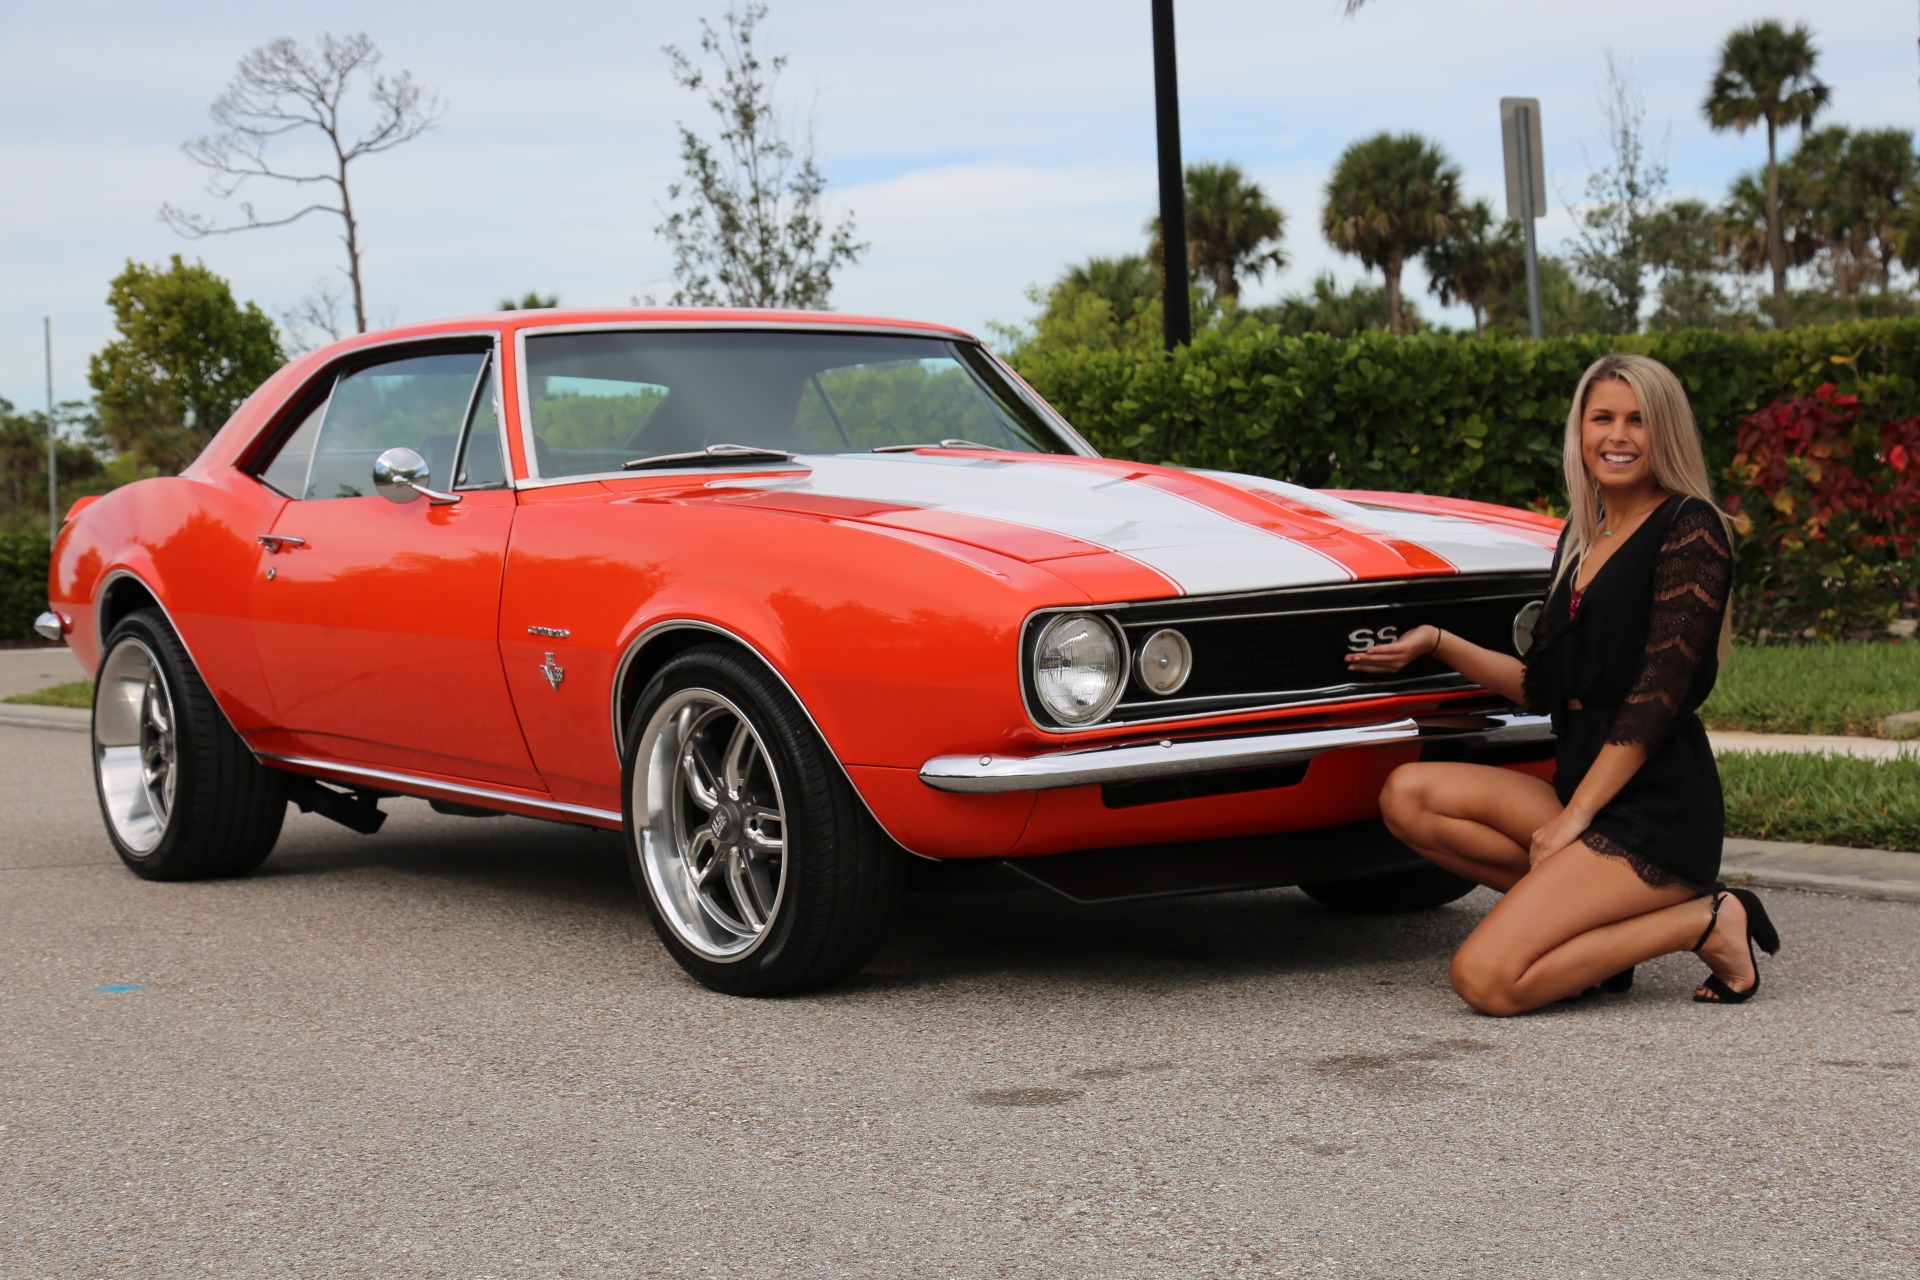 Used 1967 Chevy Camaro V8 Auto for sale Sold at Muscle Cars for Sale Inc. in Fort Myers FL 33912 7